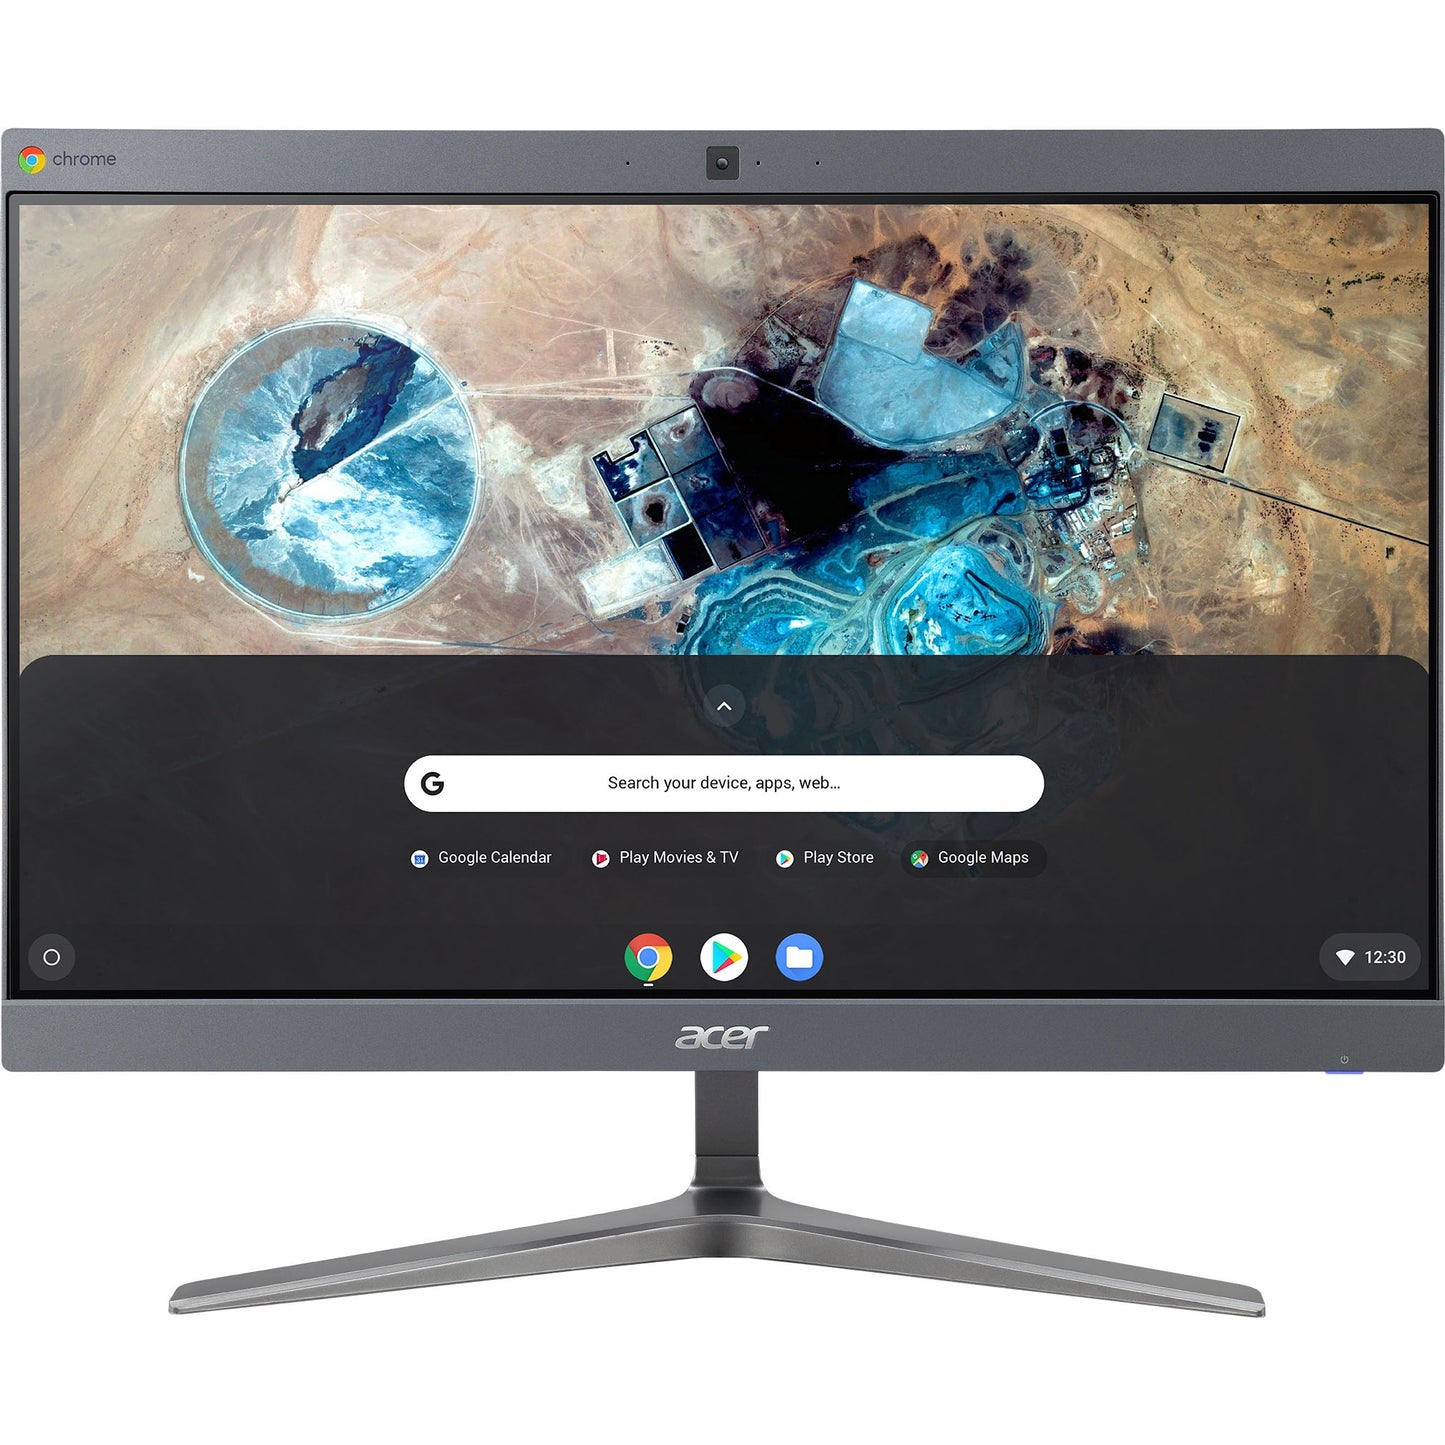 Acer Chromebase D18Q2 23.8" Celeron 4GB 128GB SSD AIO Touch PC - DQ.Z19AA.001 Reconditioned